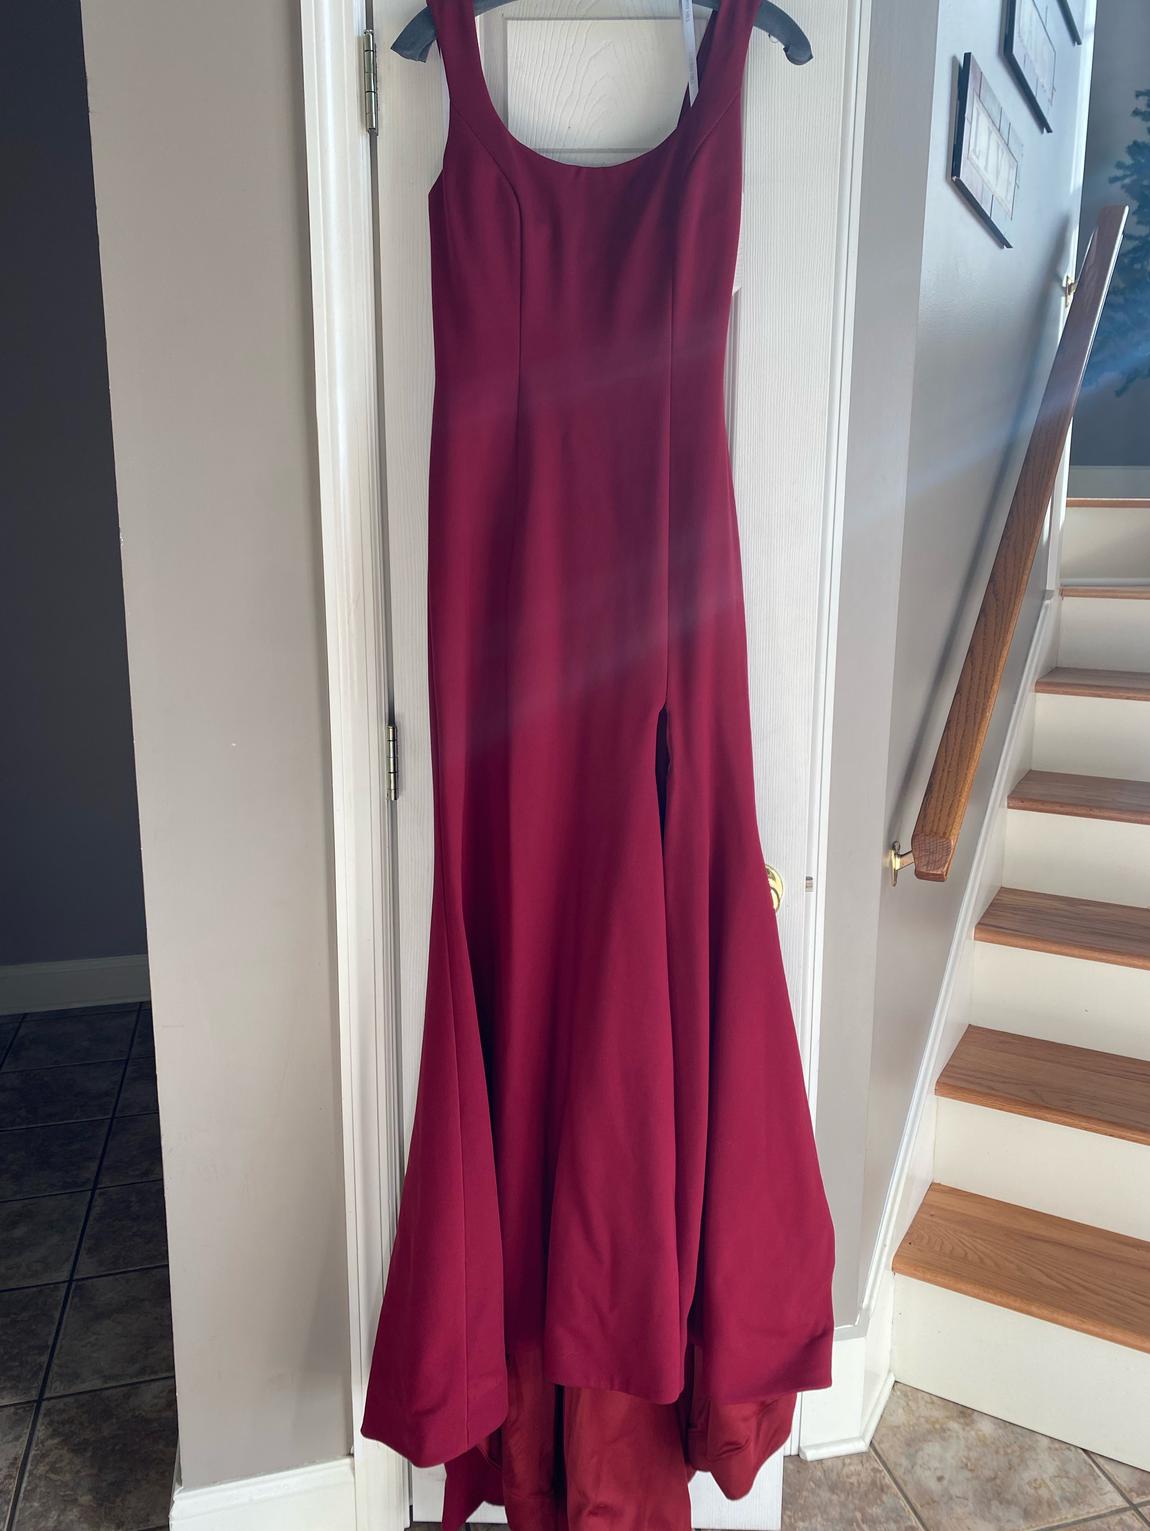 Size 10 Prom Red Dress With Train on Queenly